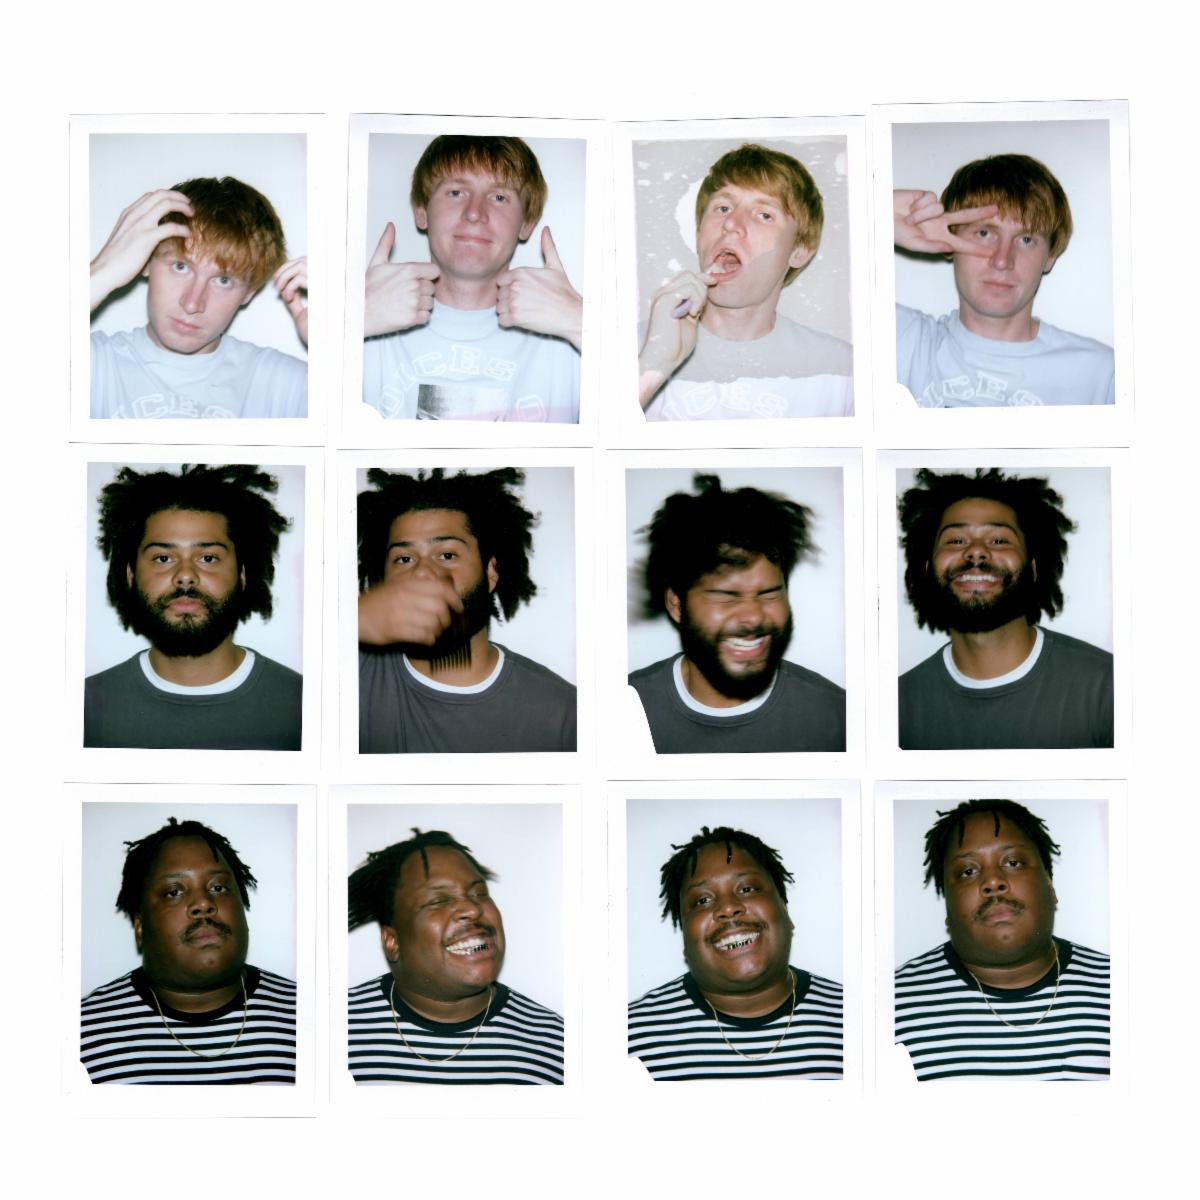 Injury Reserve have collaborated with JPEGMAFIA and Code Orange